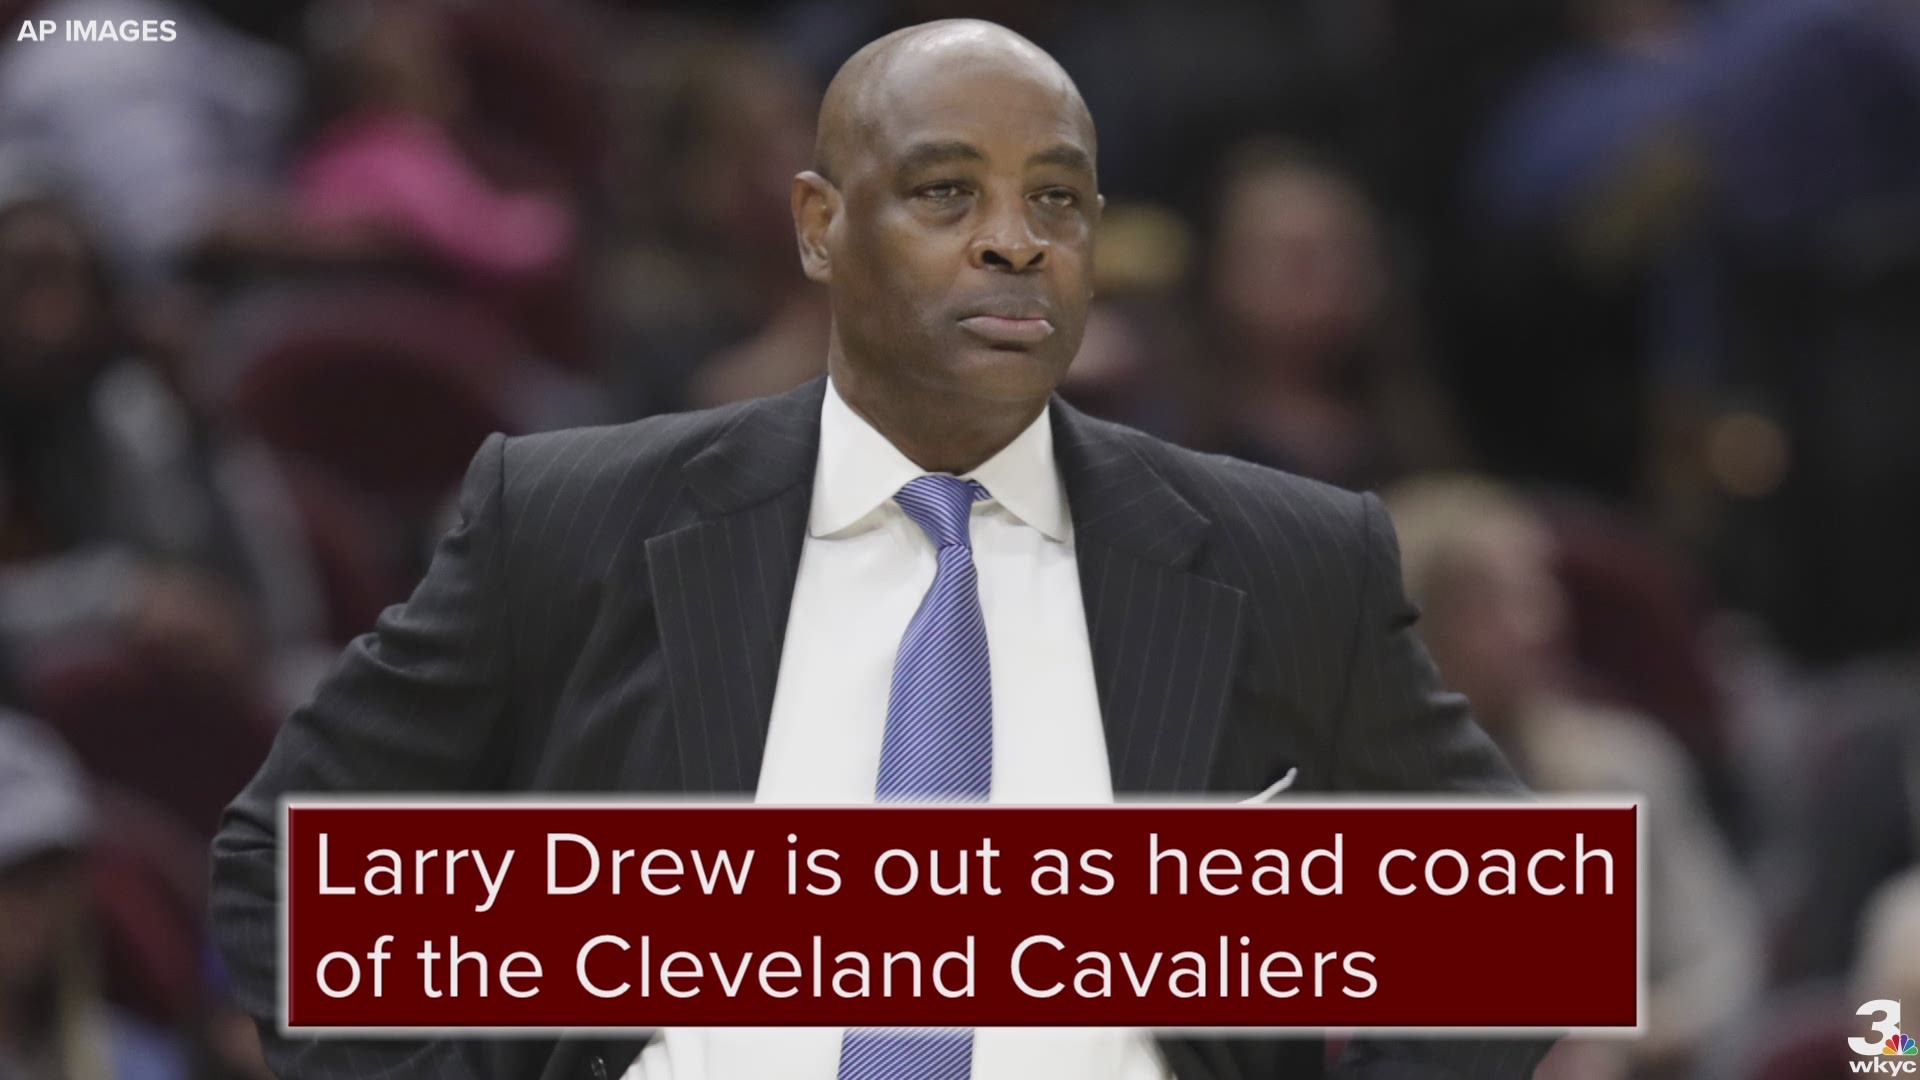 Cavs and Drew mutually agree to pursue other paths.